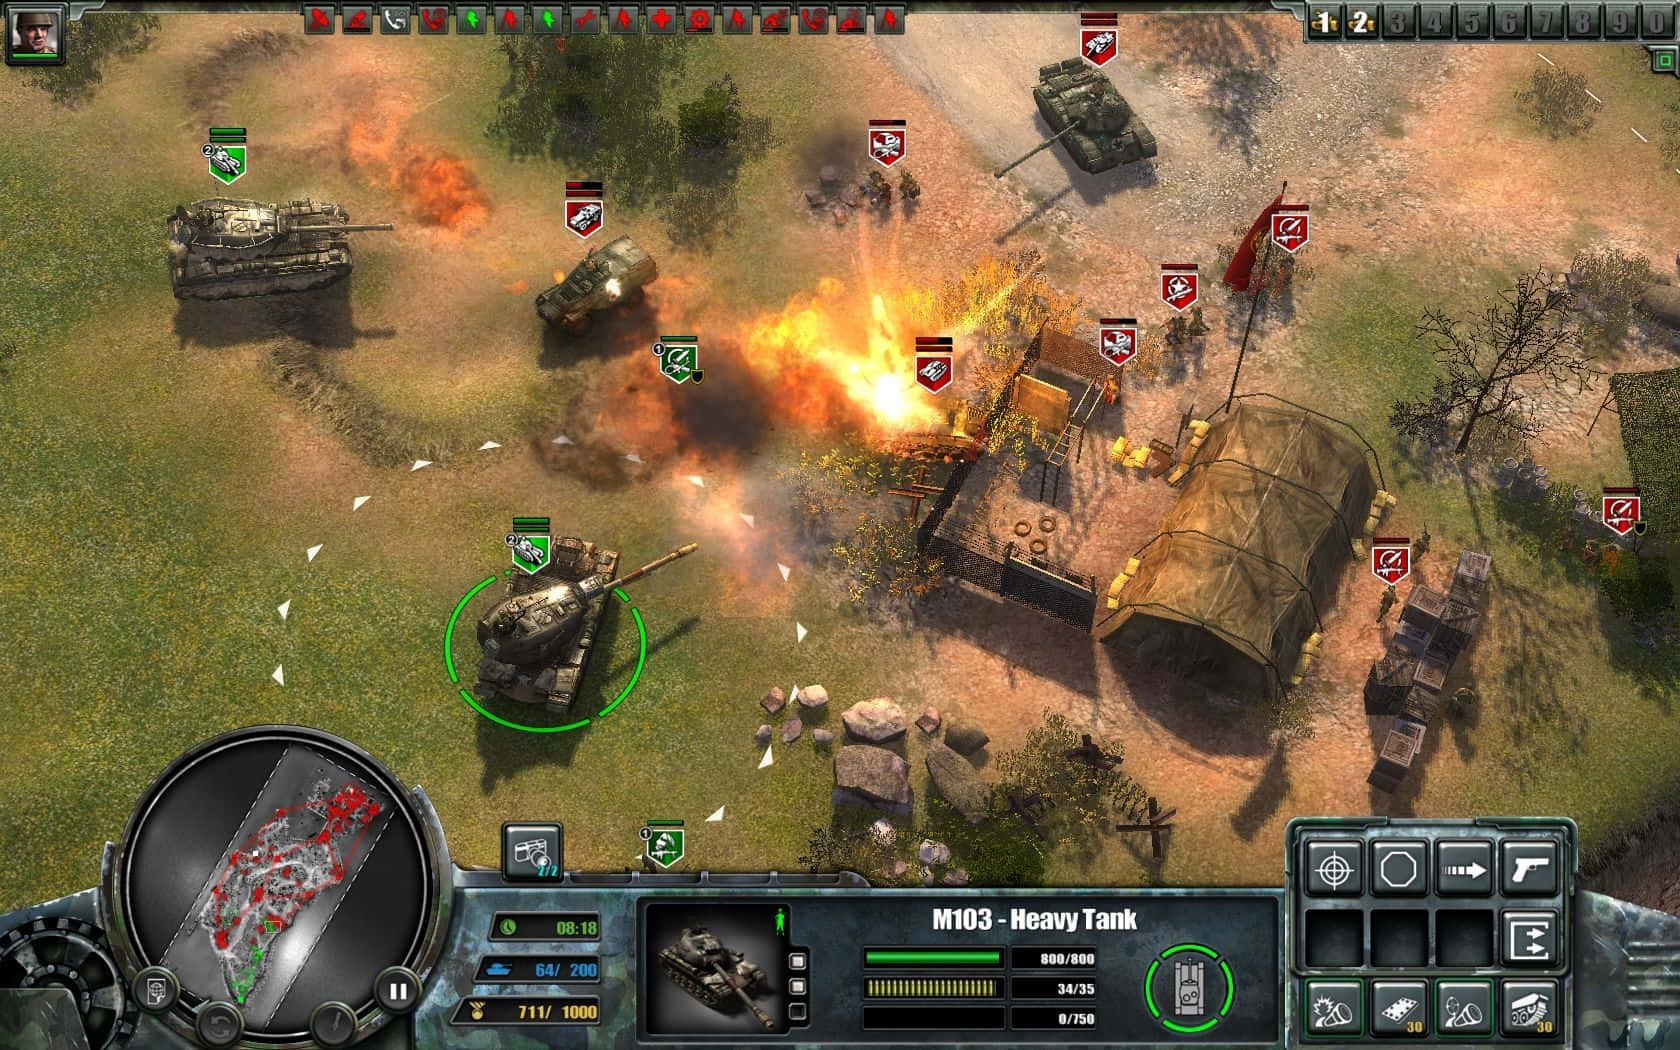 Intense battle in a real-time strategy game Wallpaper